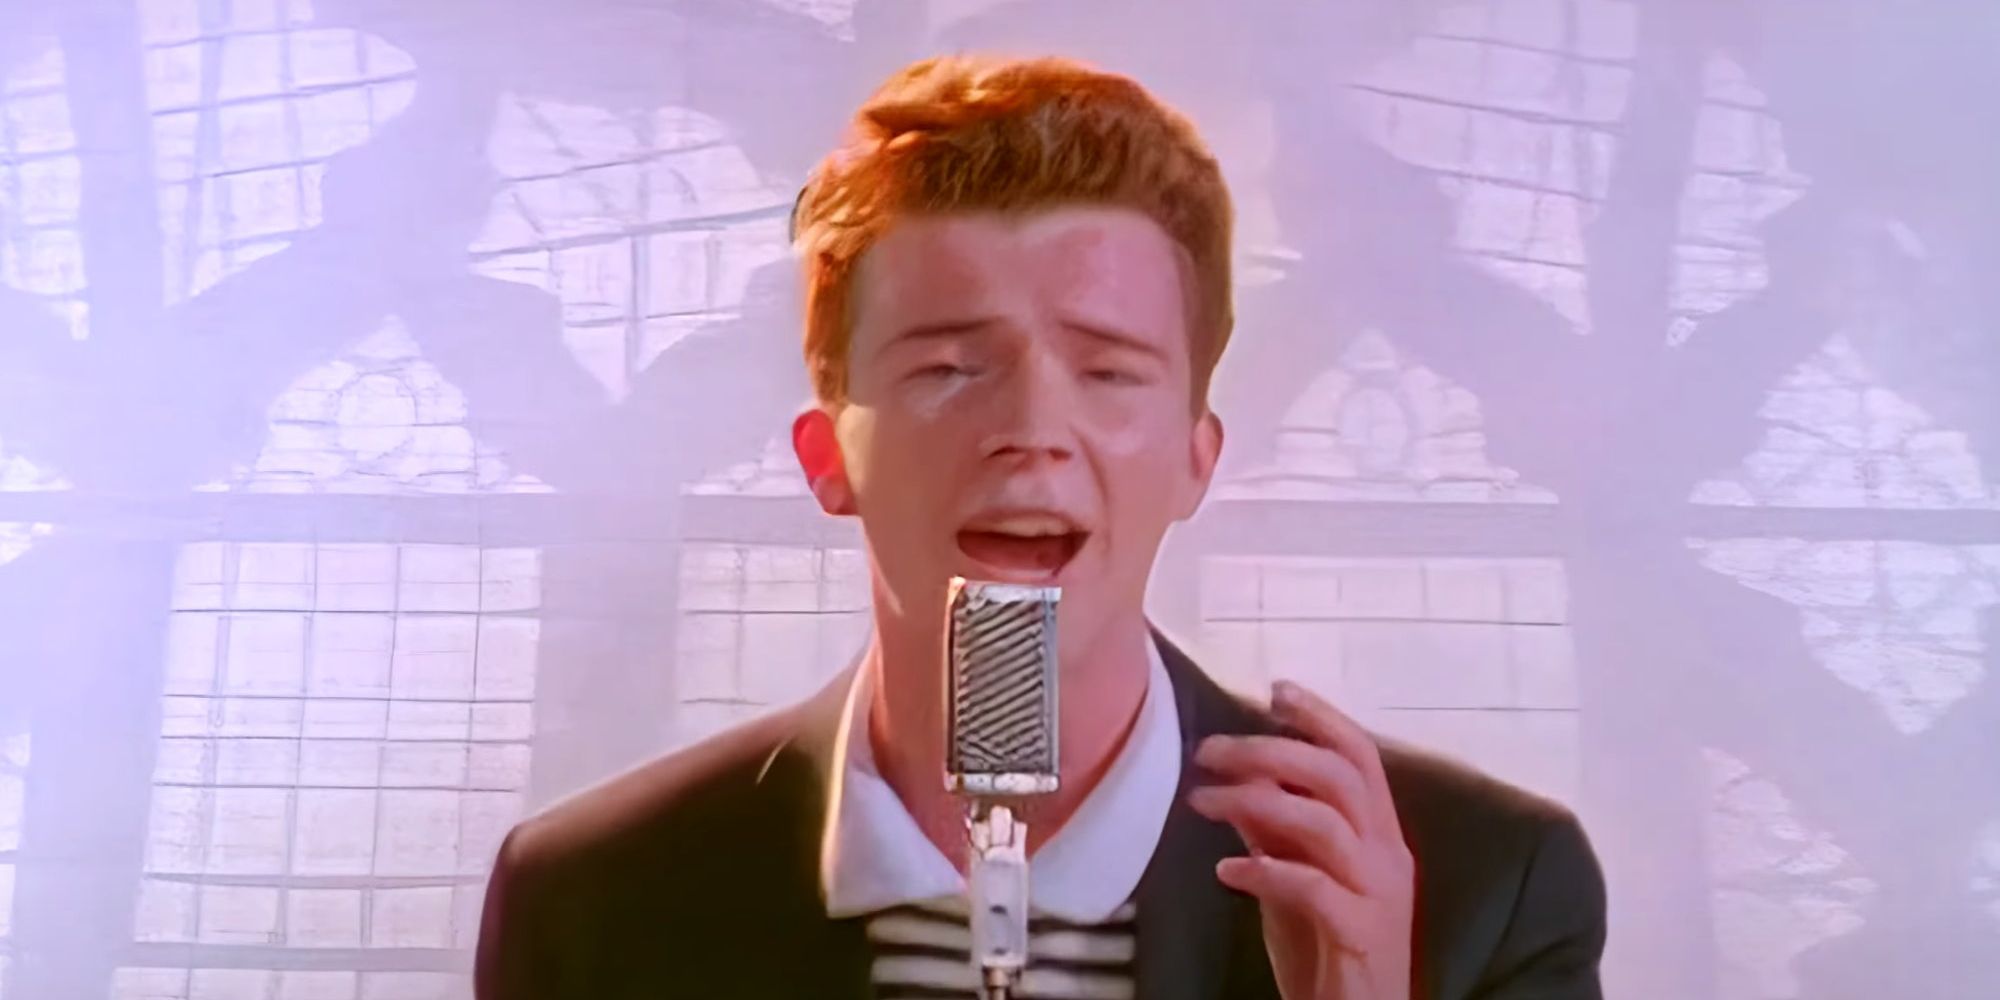 One Hit Wonders: How The Rickroll Revived Rick Astley's Never Gonna Give  You Up — afterglow